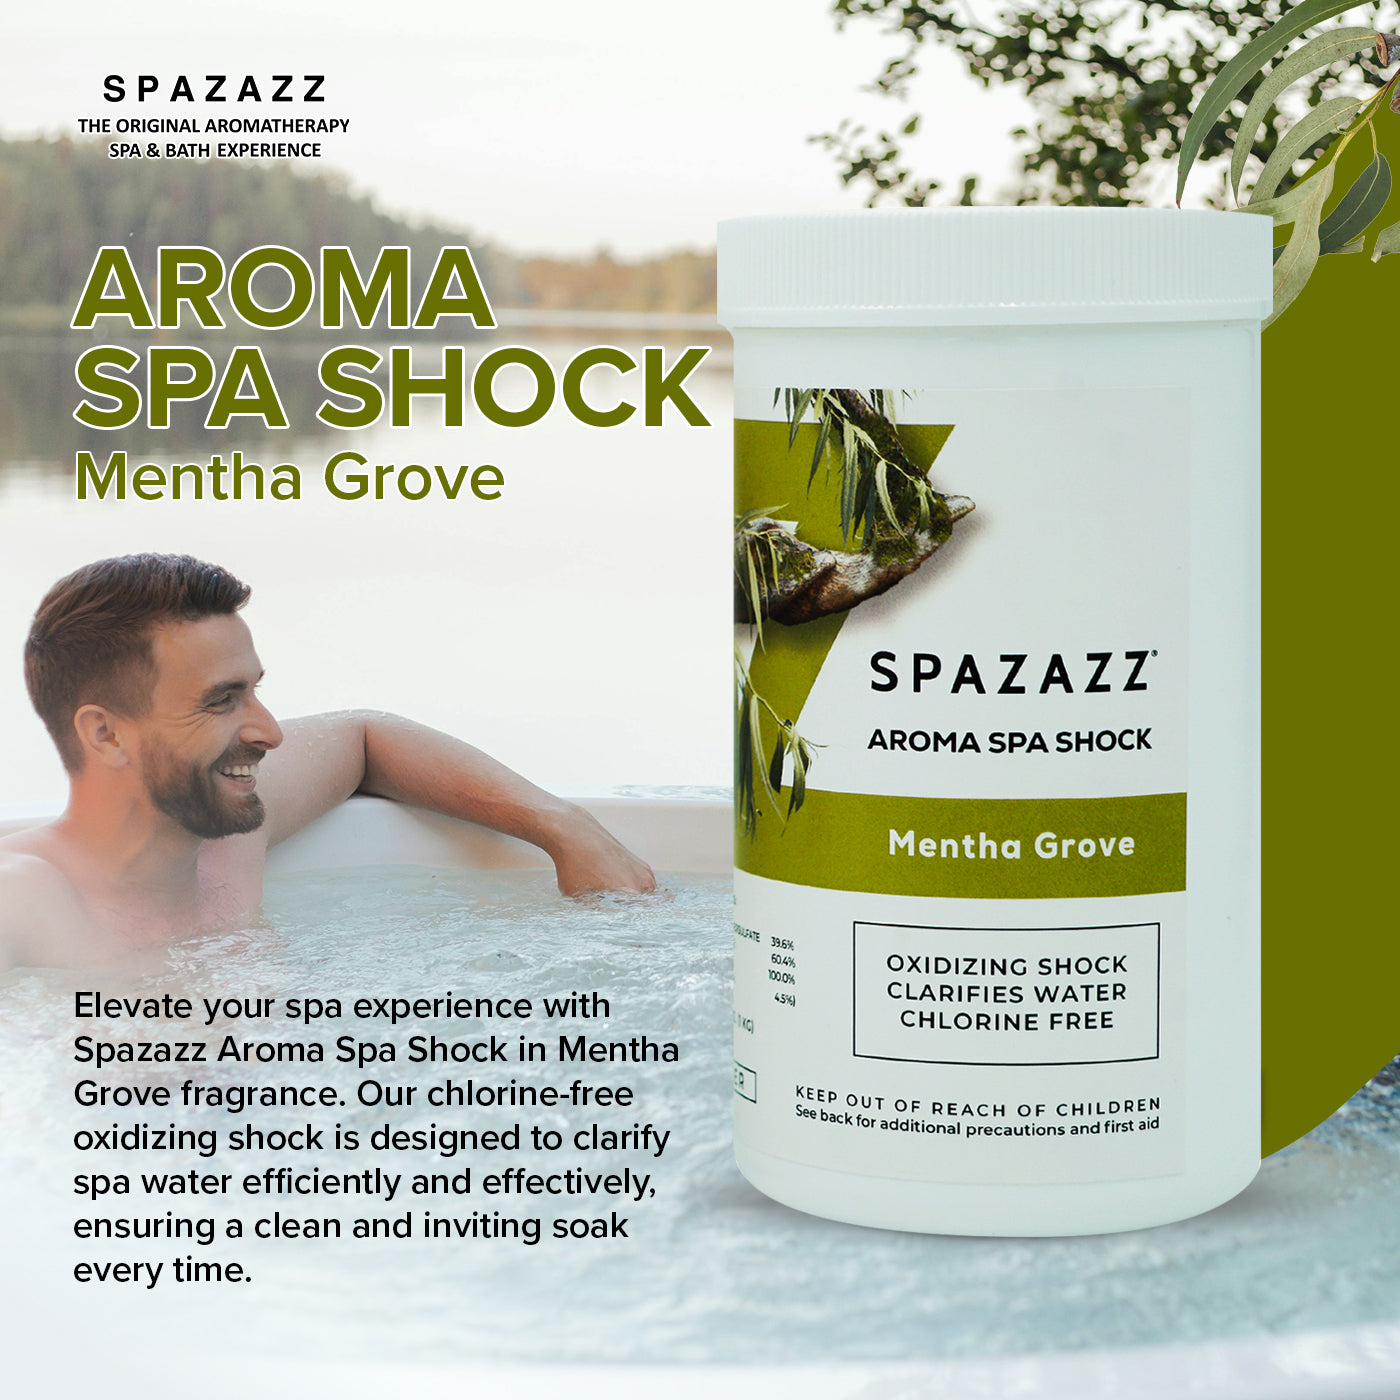 Aroma Spa Shock Mentha Grove - Chlorine-Free Oxidizing Shock for Spa Water Clarification with Scoop - Professional Grade Formula